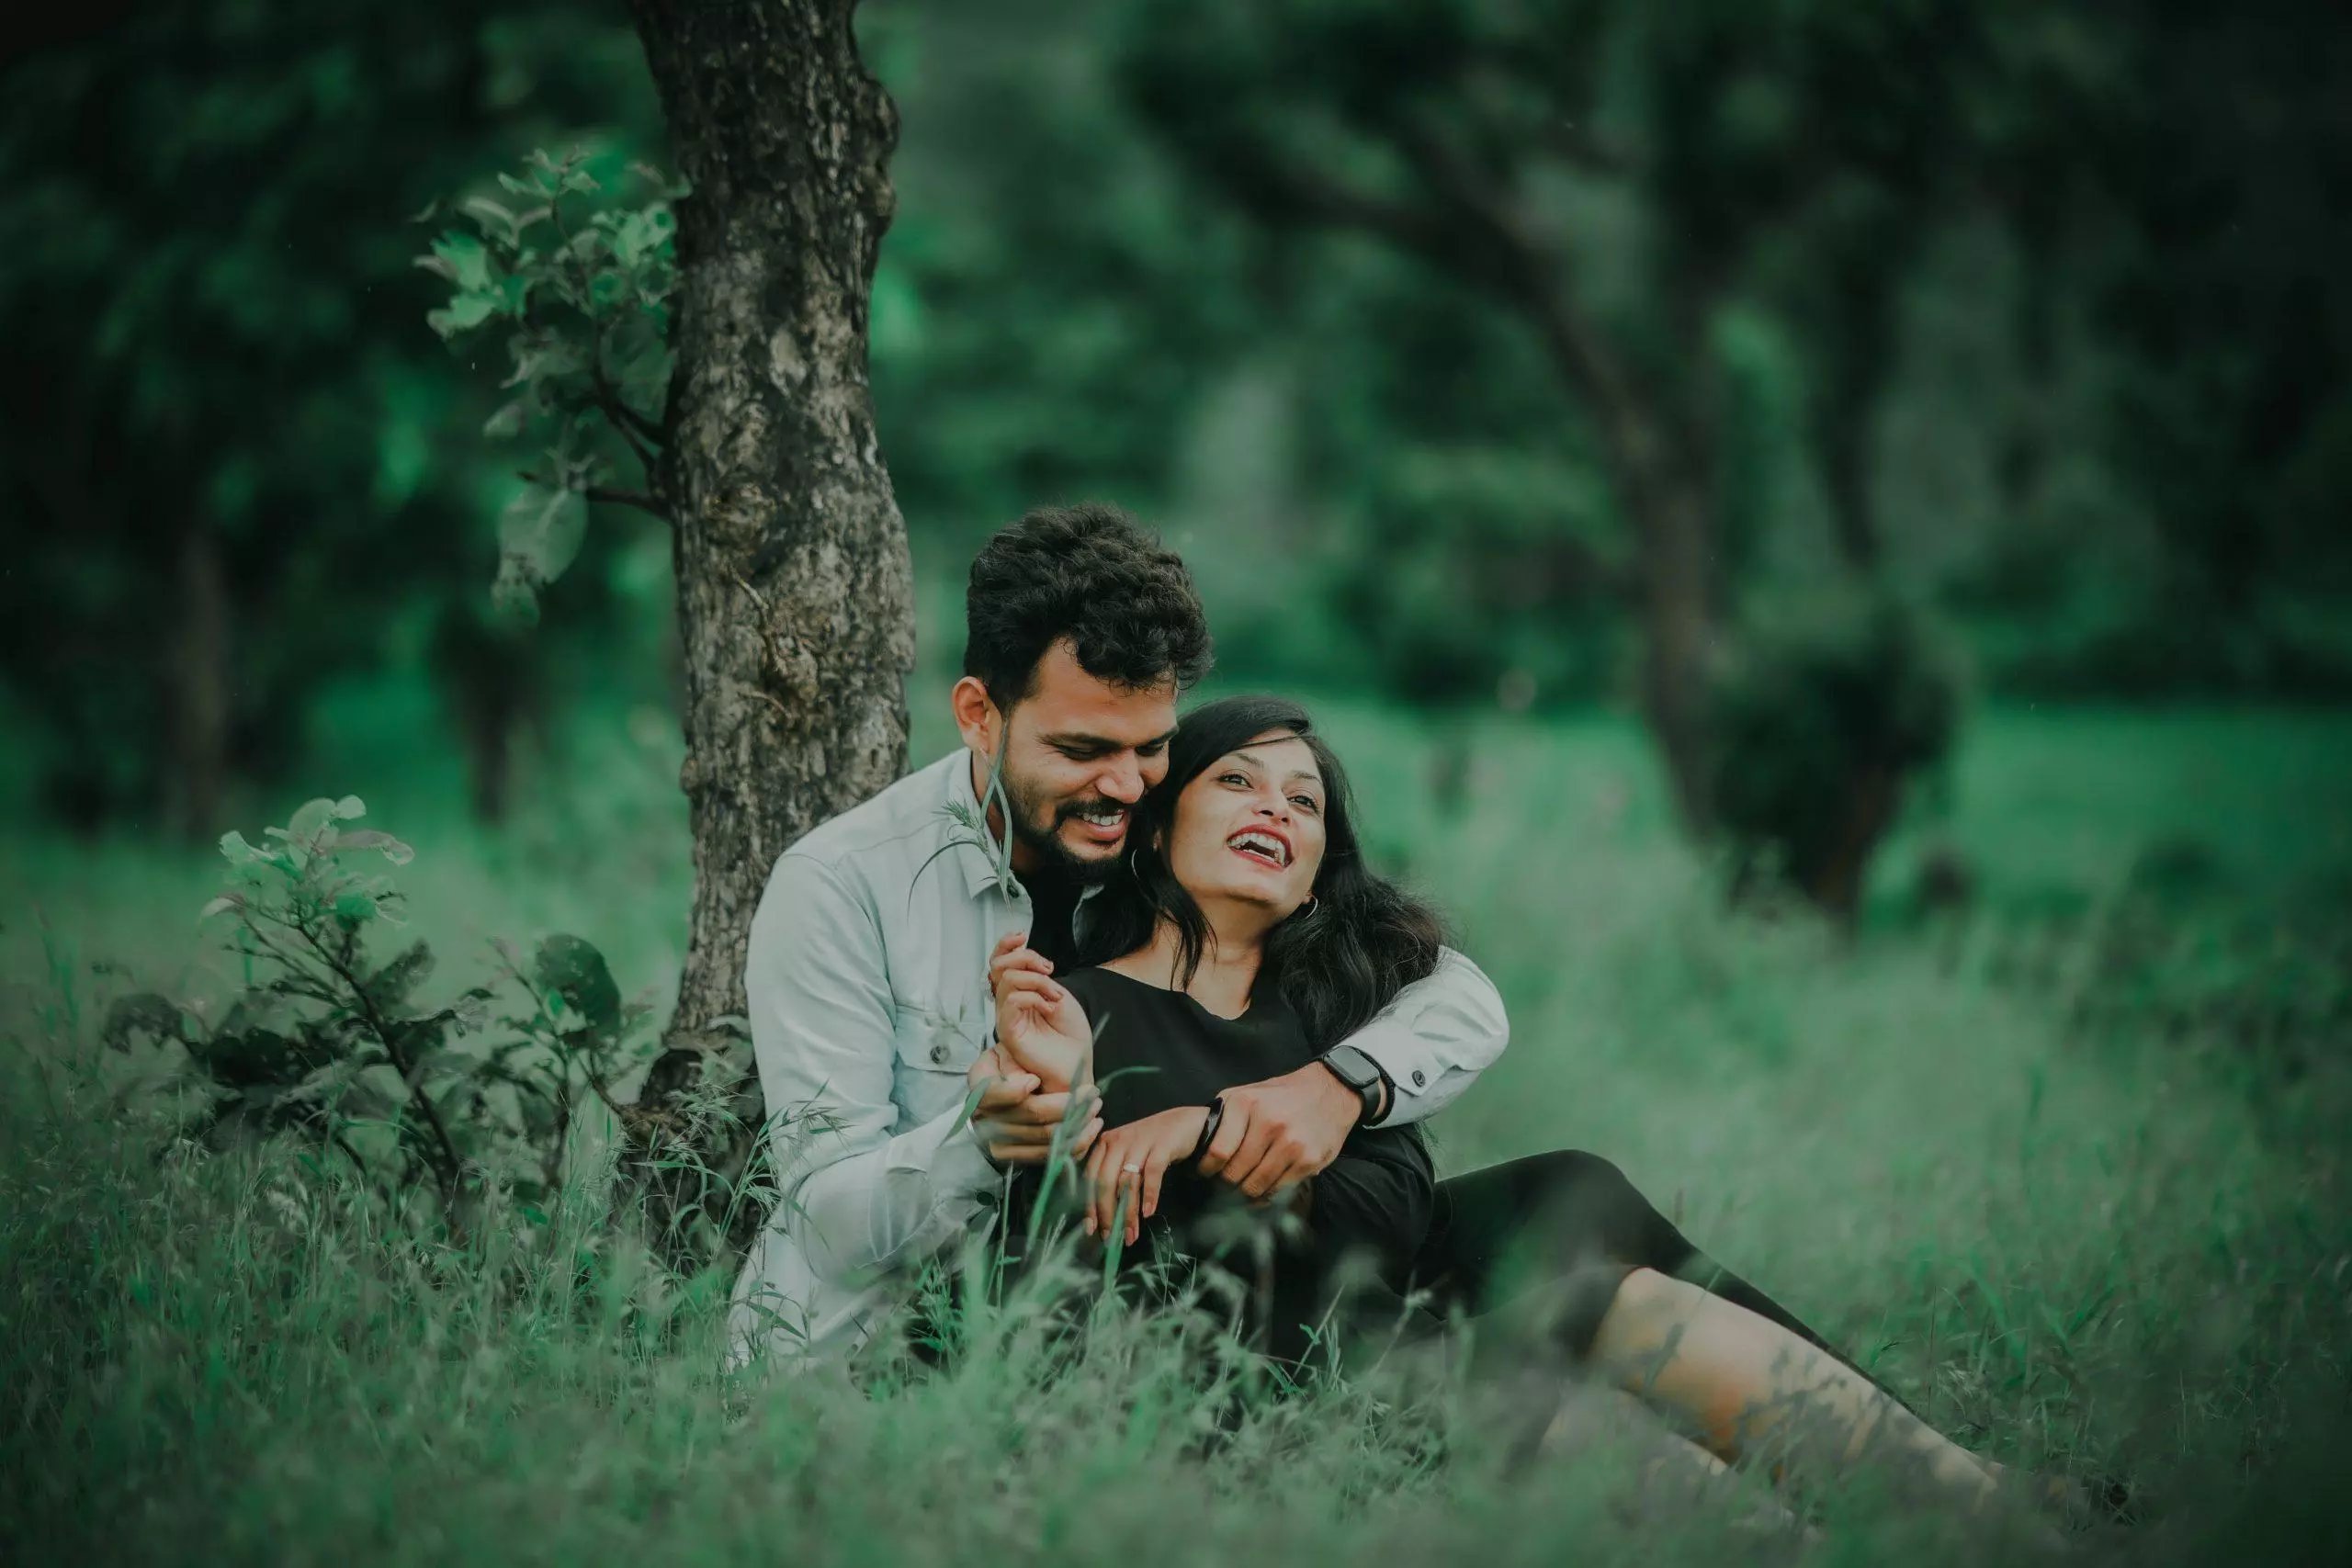 Romantic PreWedding Shoot Poses That Every Couple Must Try  Frozen Moments